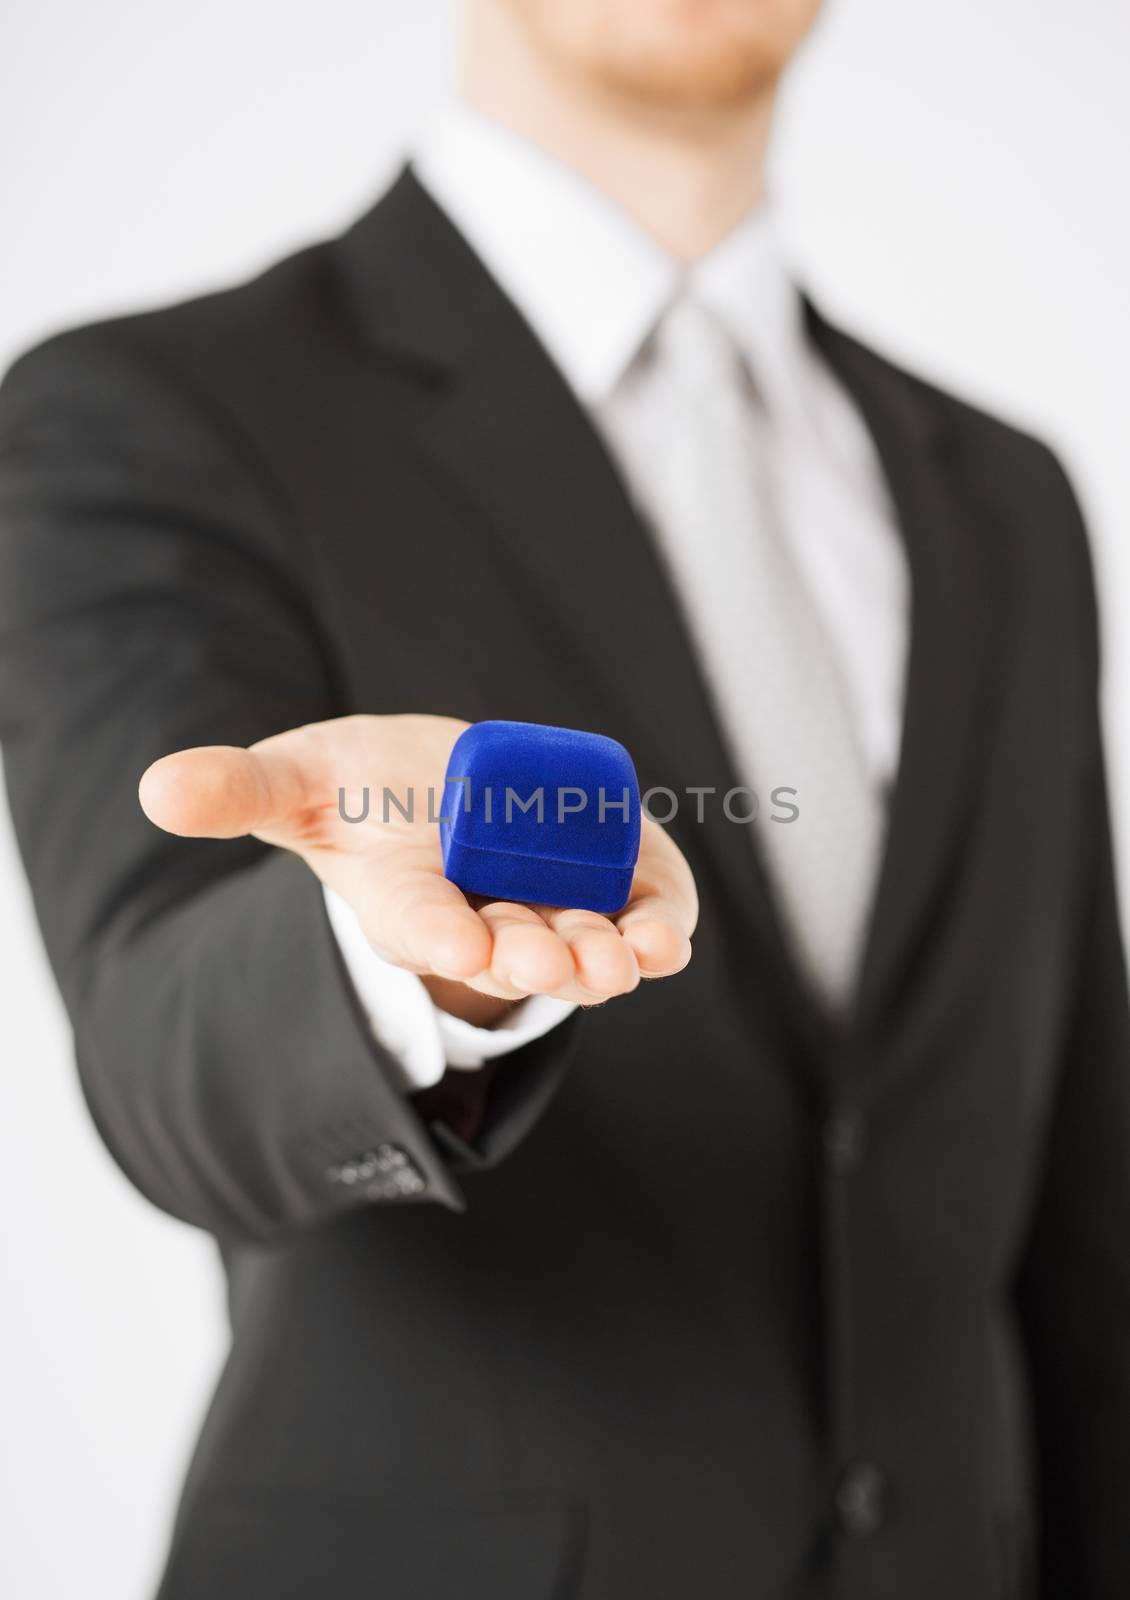 picture of man with gift box in suit